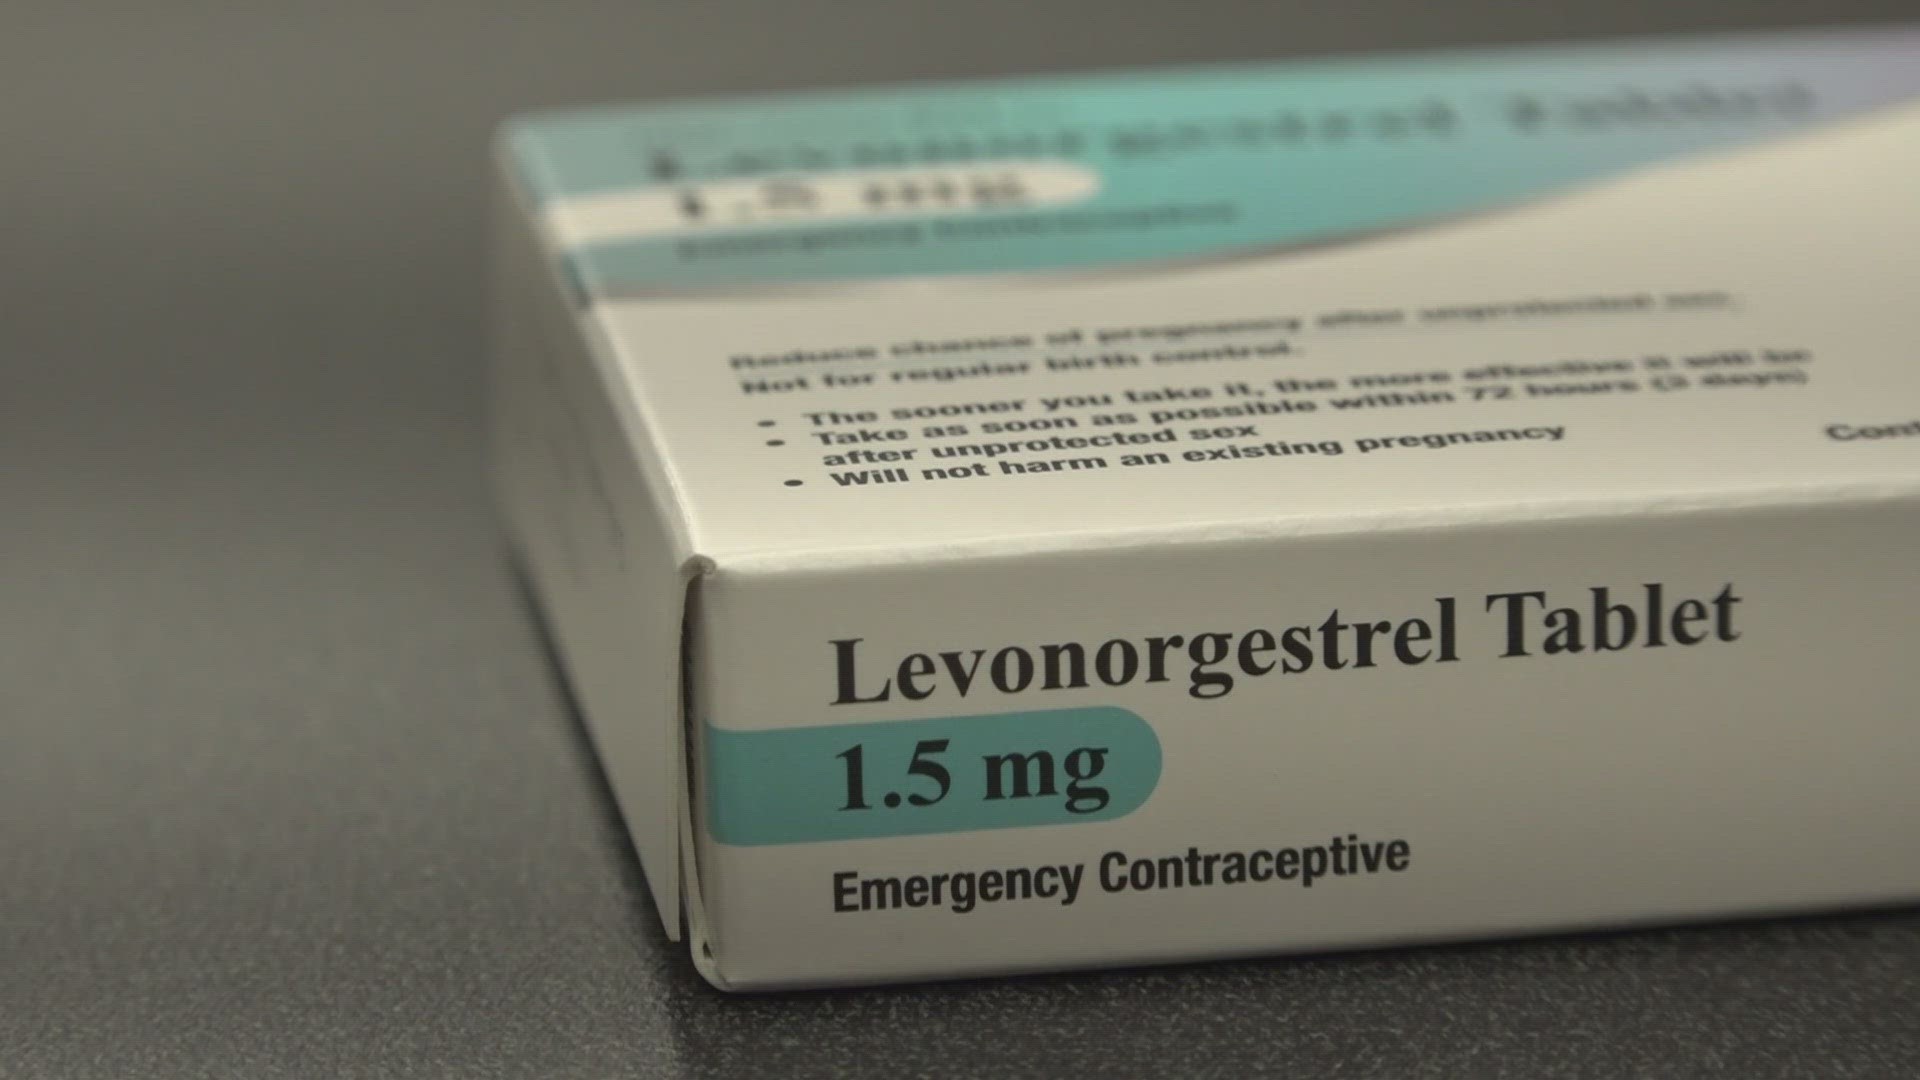 Pilot program offers free emergency contraception to Missourians. Missouri Family Health Council, also known as MFHC, launched the pilot program.